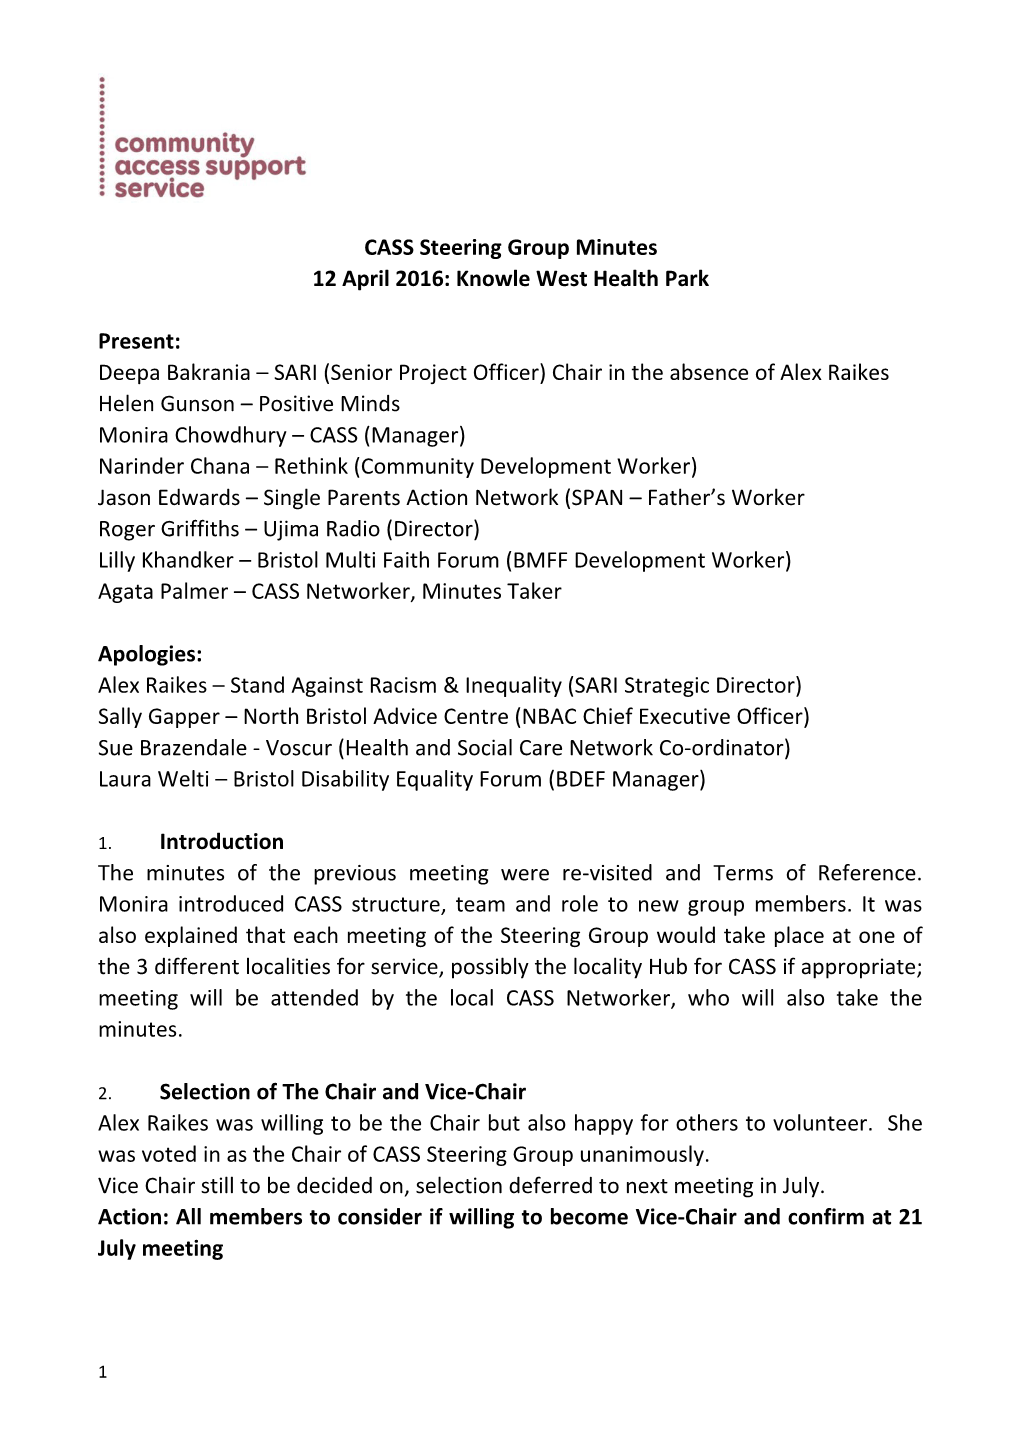 CASS Steering Group Minutes